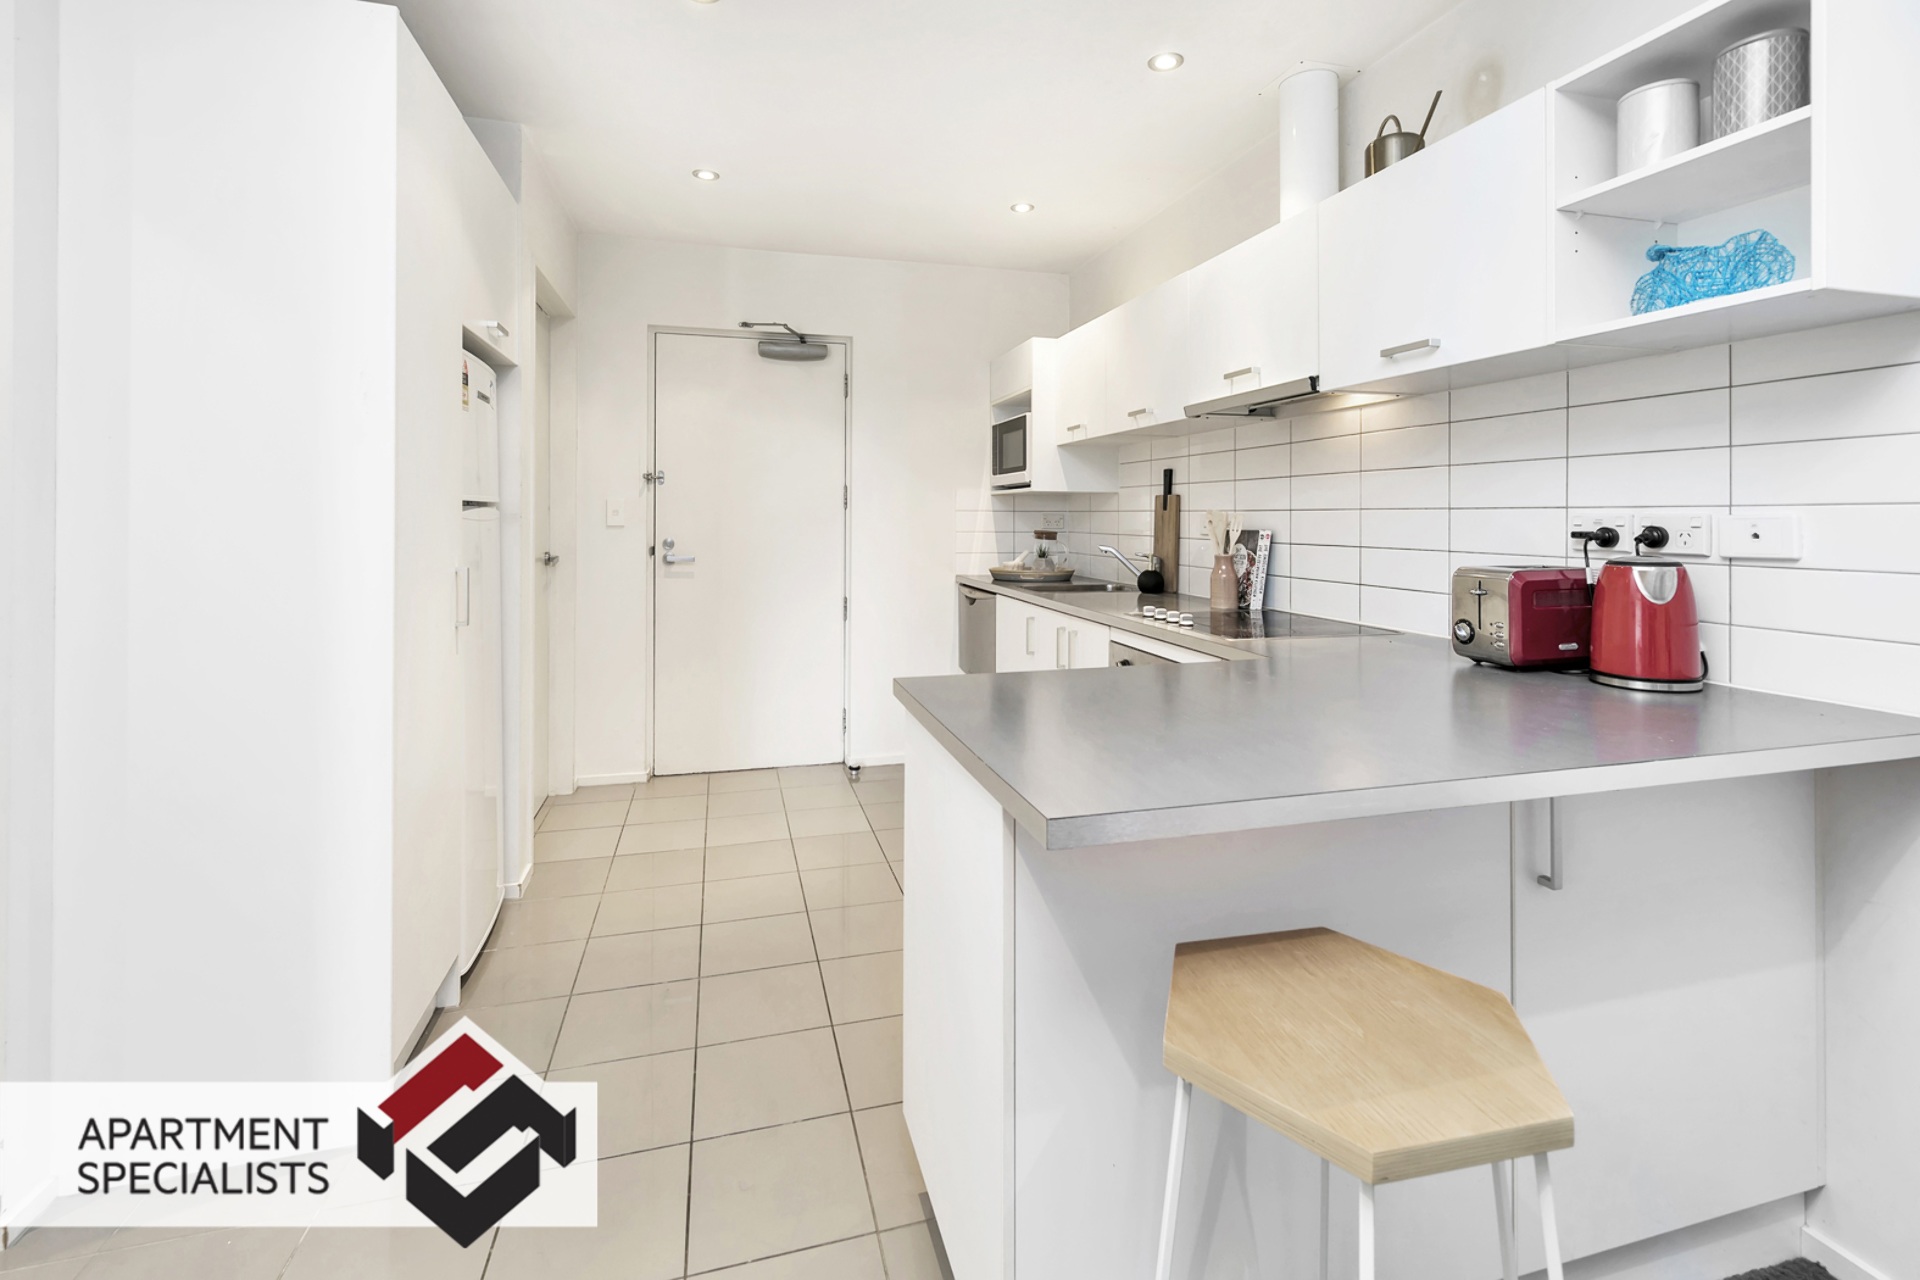 2 | 71 Spencer Road, Albany | Apartment Specialists